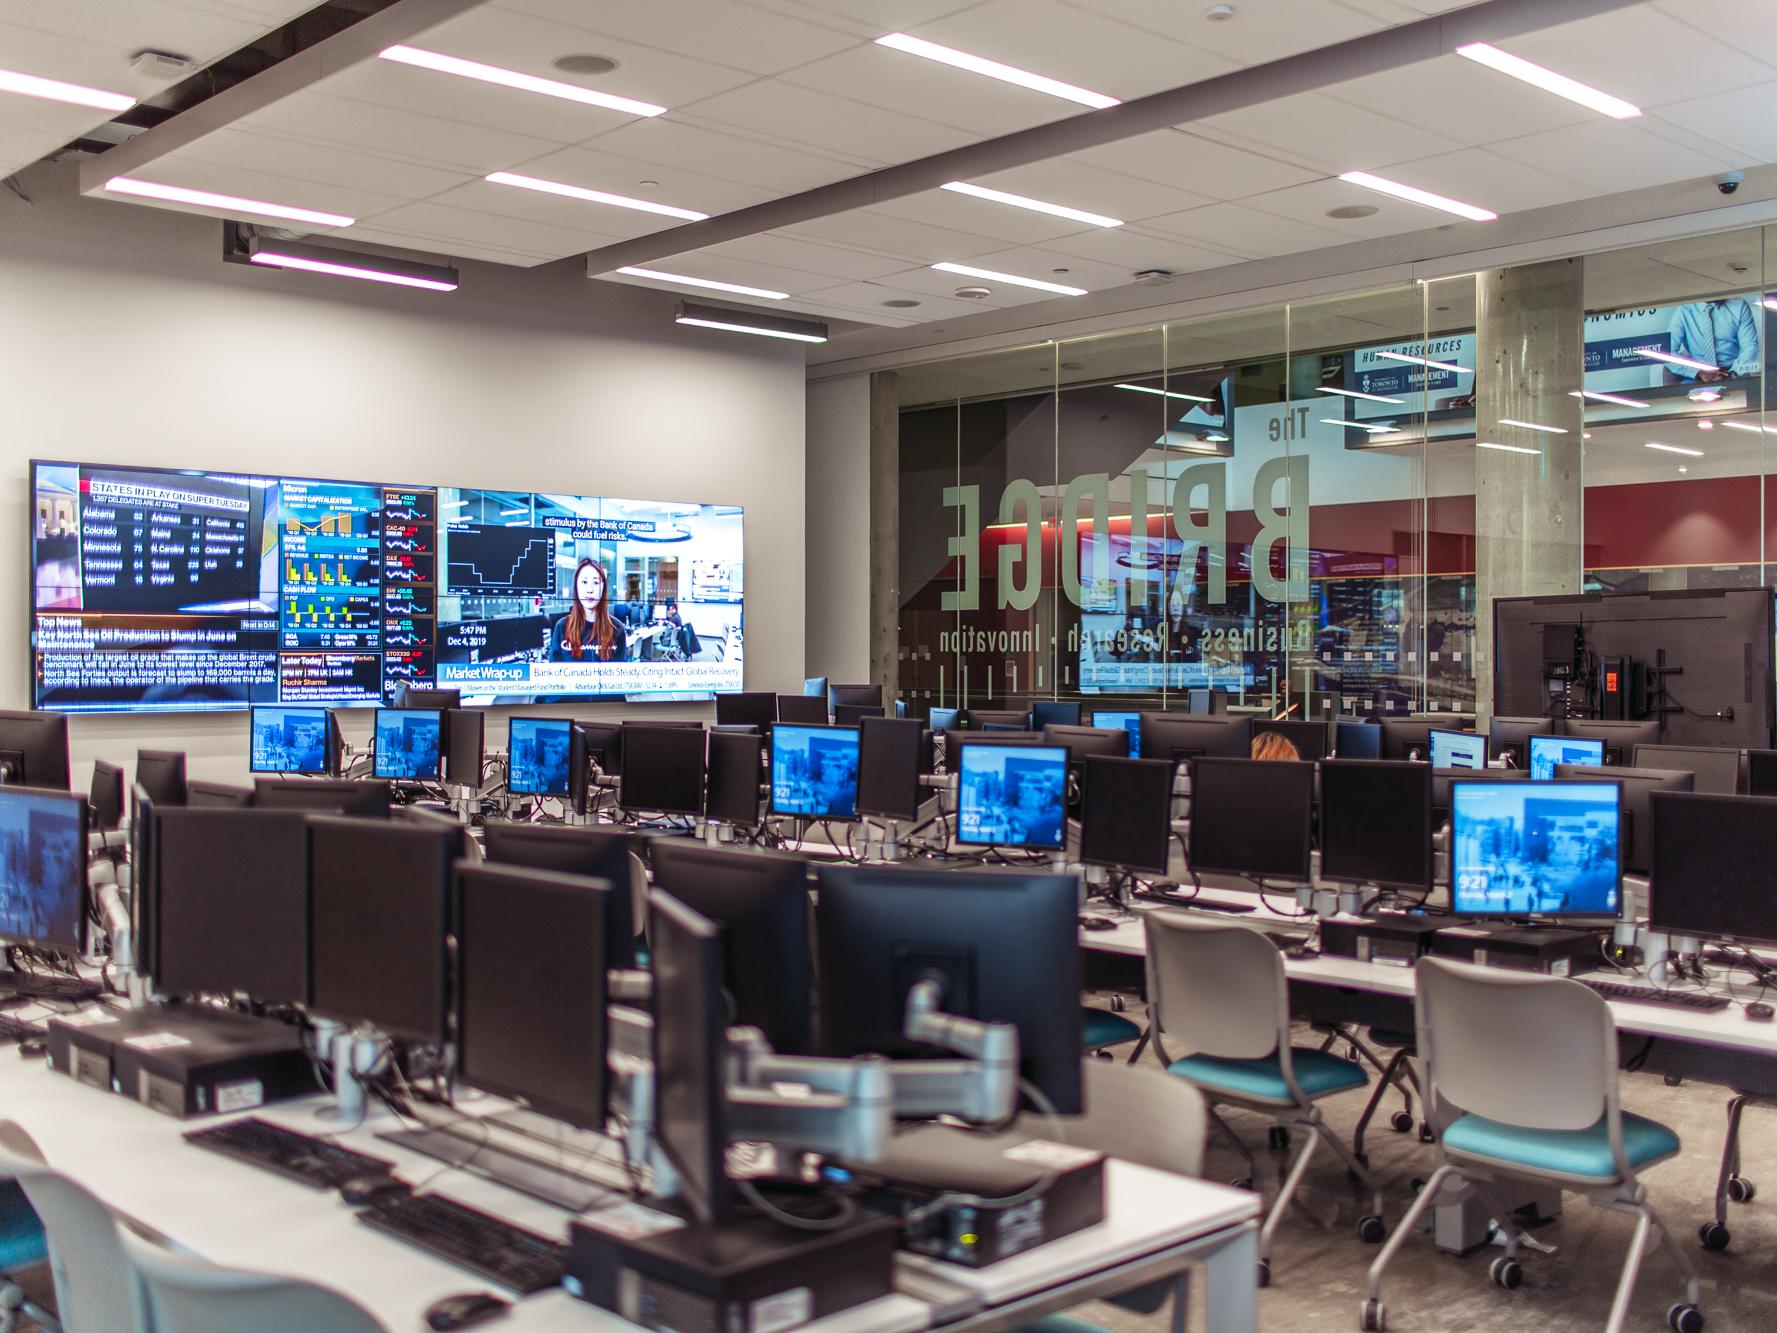 A glass-walled classroom with dozens of screens resembling a trading floor.